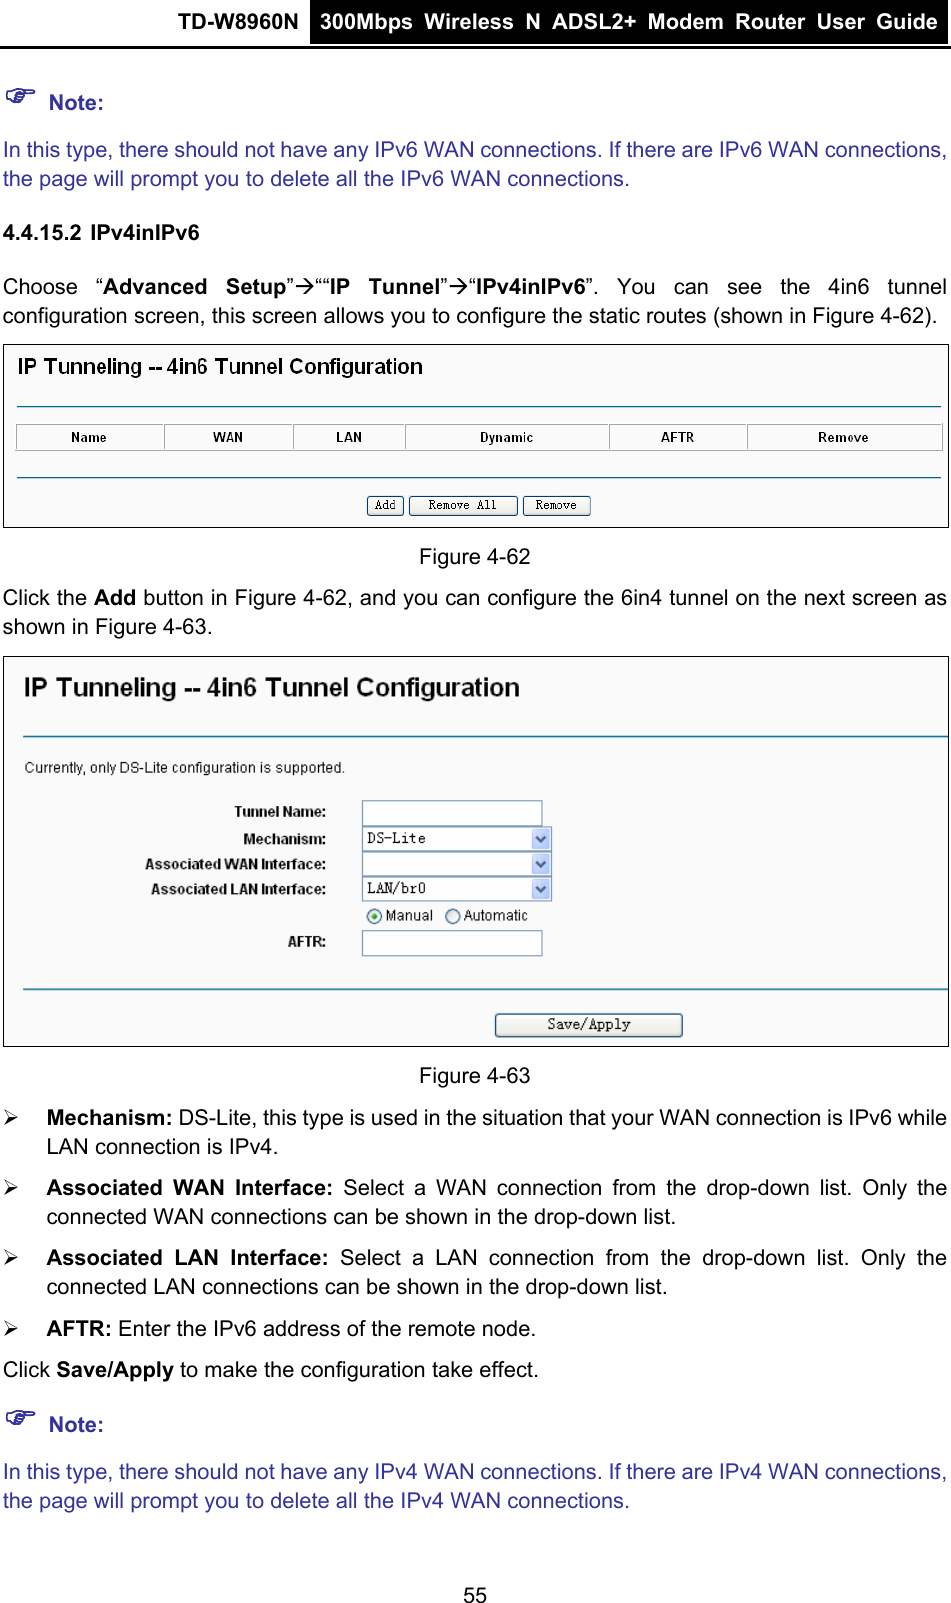 TD-W8960N  300Mbps Wireless N ADSL2+ Modem Router User Guide   Note: In this type, there should not have any IPv6 WAN connections. If there are IPv6 WAN connections, the page will prompt you to delete all the IPv6 WAN connections. 4.4.15.2 IPv4inIPv6 Choose “Advanced Setup”““IP Tunnel”“IPv4inIPv6”. You can see the 4in6 tunnel configuration screen, this screen allows you to configure the static routes (shown in Figure 4-62).  Figure 4-62 Click the Add button in Figure 4-62, and you can configure the 6in4 tunnel on the next screen as shown in Figure 4-63.  Figure 4-63  Mechanism: DS-Lite, this type is used in the situation that your WAN connection is IPv6 while           LAN connection is IPv4.  Associated WAN Interface: Select a WAN connection from the drop-down list. Only the connected WAN connections can be shown in the drop-down list.  Associated LAN Interface: Select a LAN connection from the drop-down list. Only the connected LAN connections can be shown in the drop-down list.  AFTR: Enter the IPv6 address of the remote node. Click Save/Apply to make the configuration take effect.  Note: In this type, there should not have any IPv4 WAN connections. If there are IPv4 WAN connections, the page will prompt you to delete all the IPv4 WAN connections. 55 